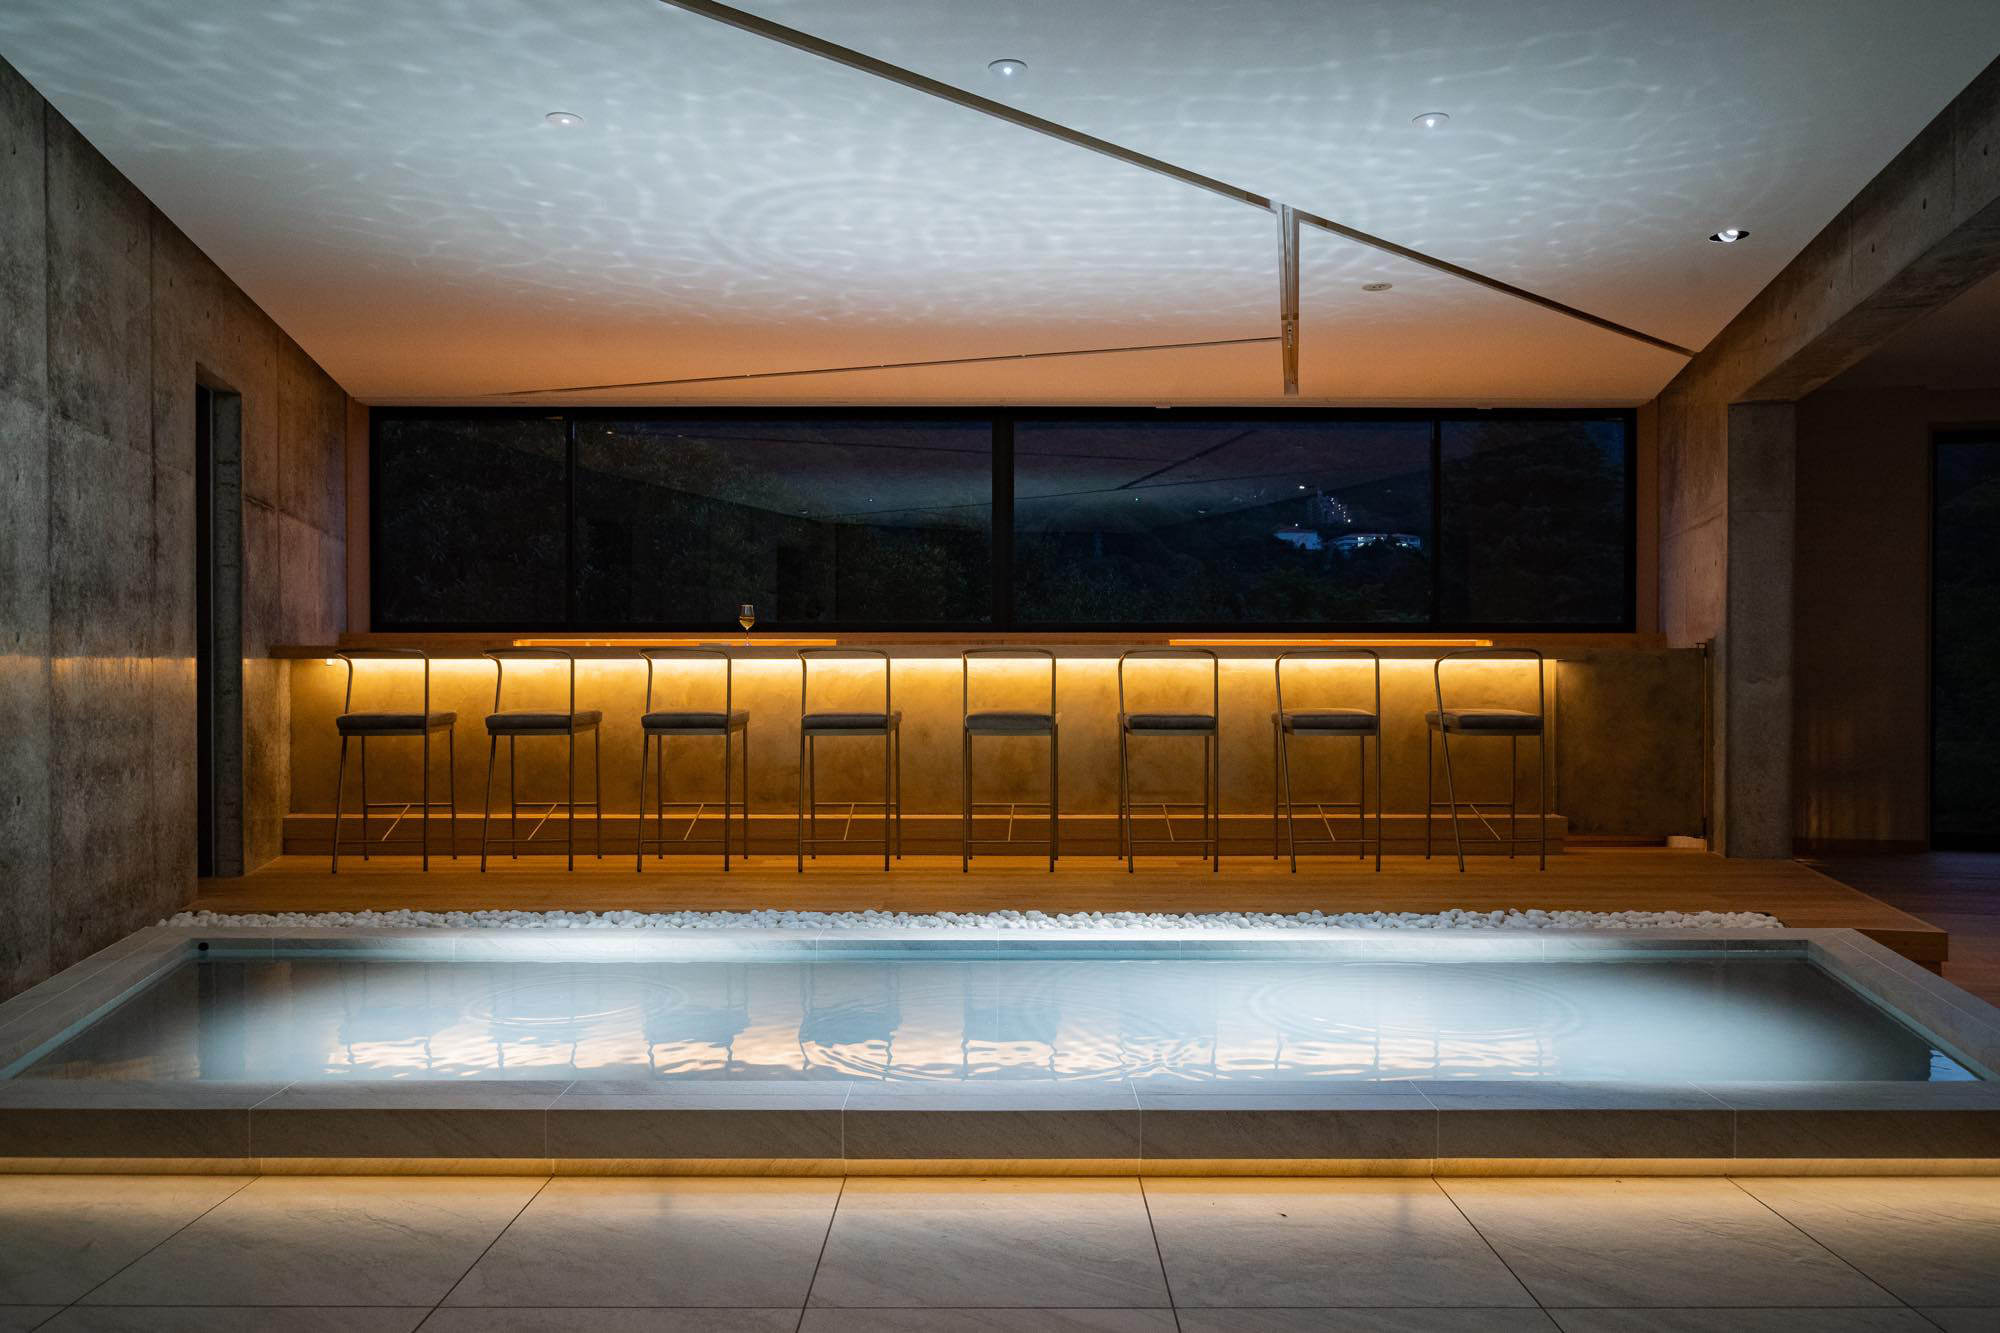 With the soft lights from the candles and downlights, the bar becomes a place to relax and spend the quiet evening.